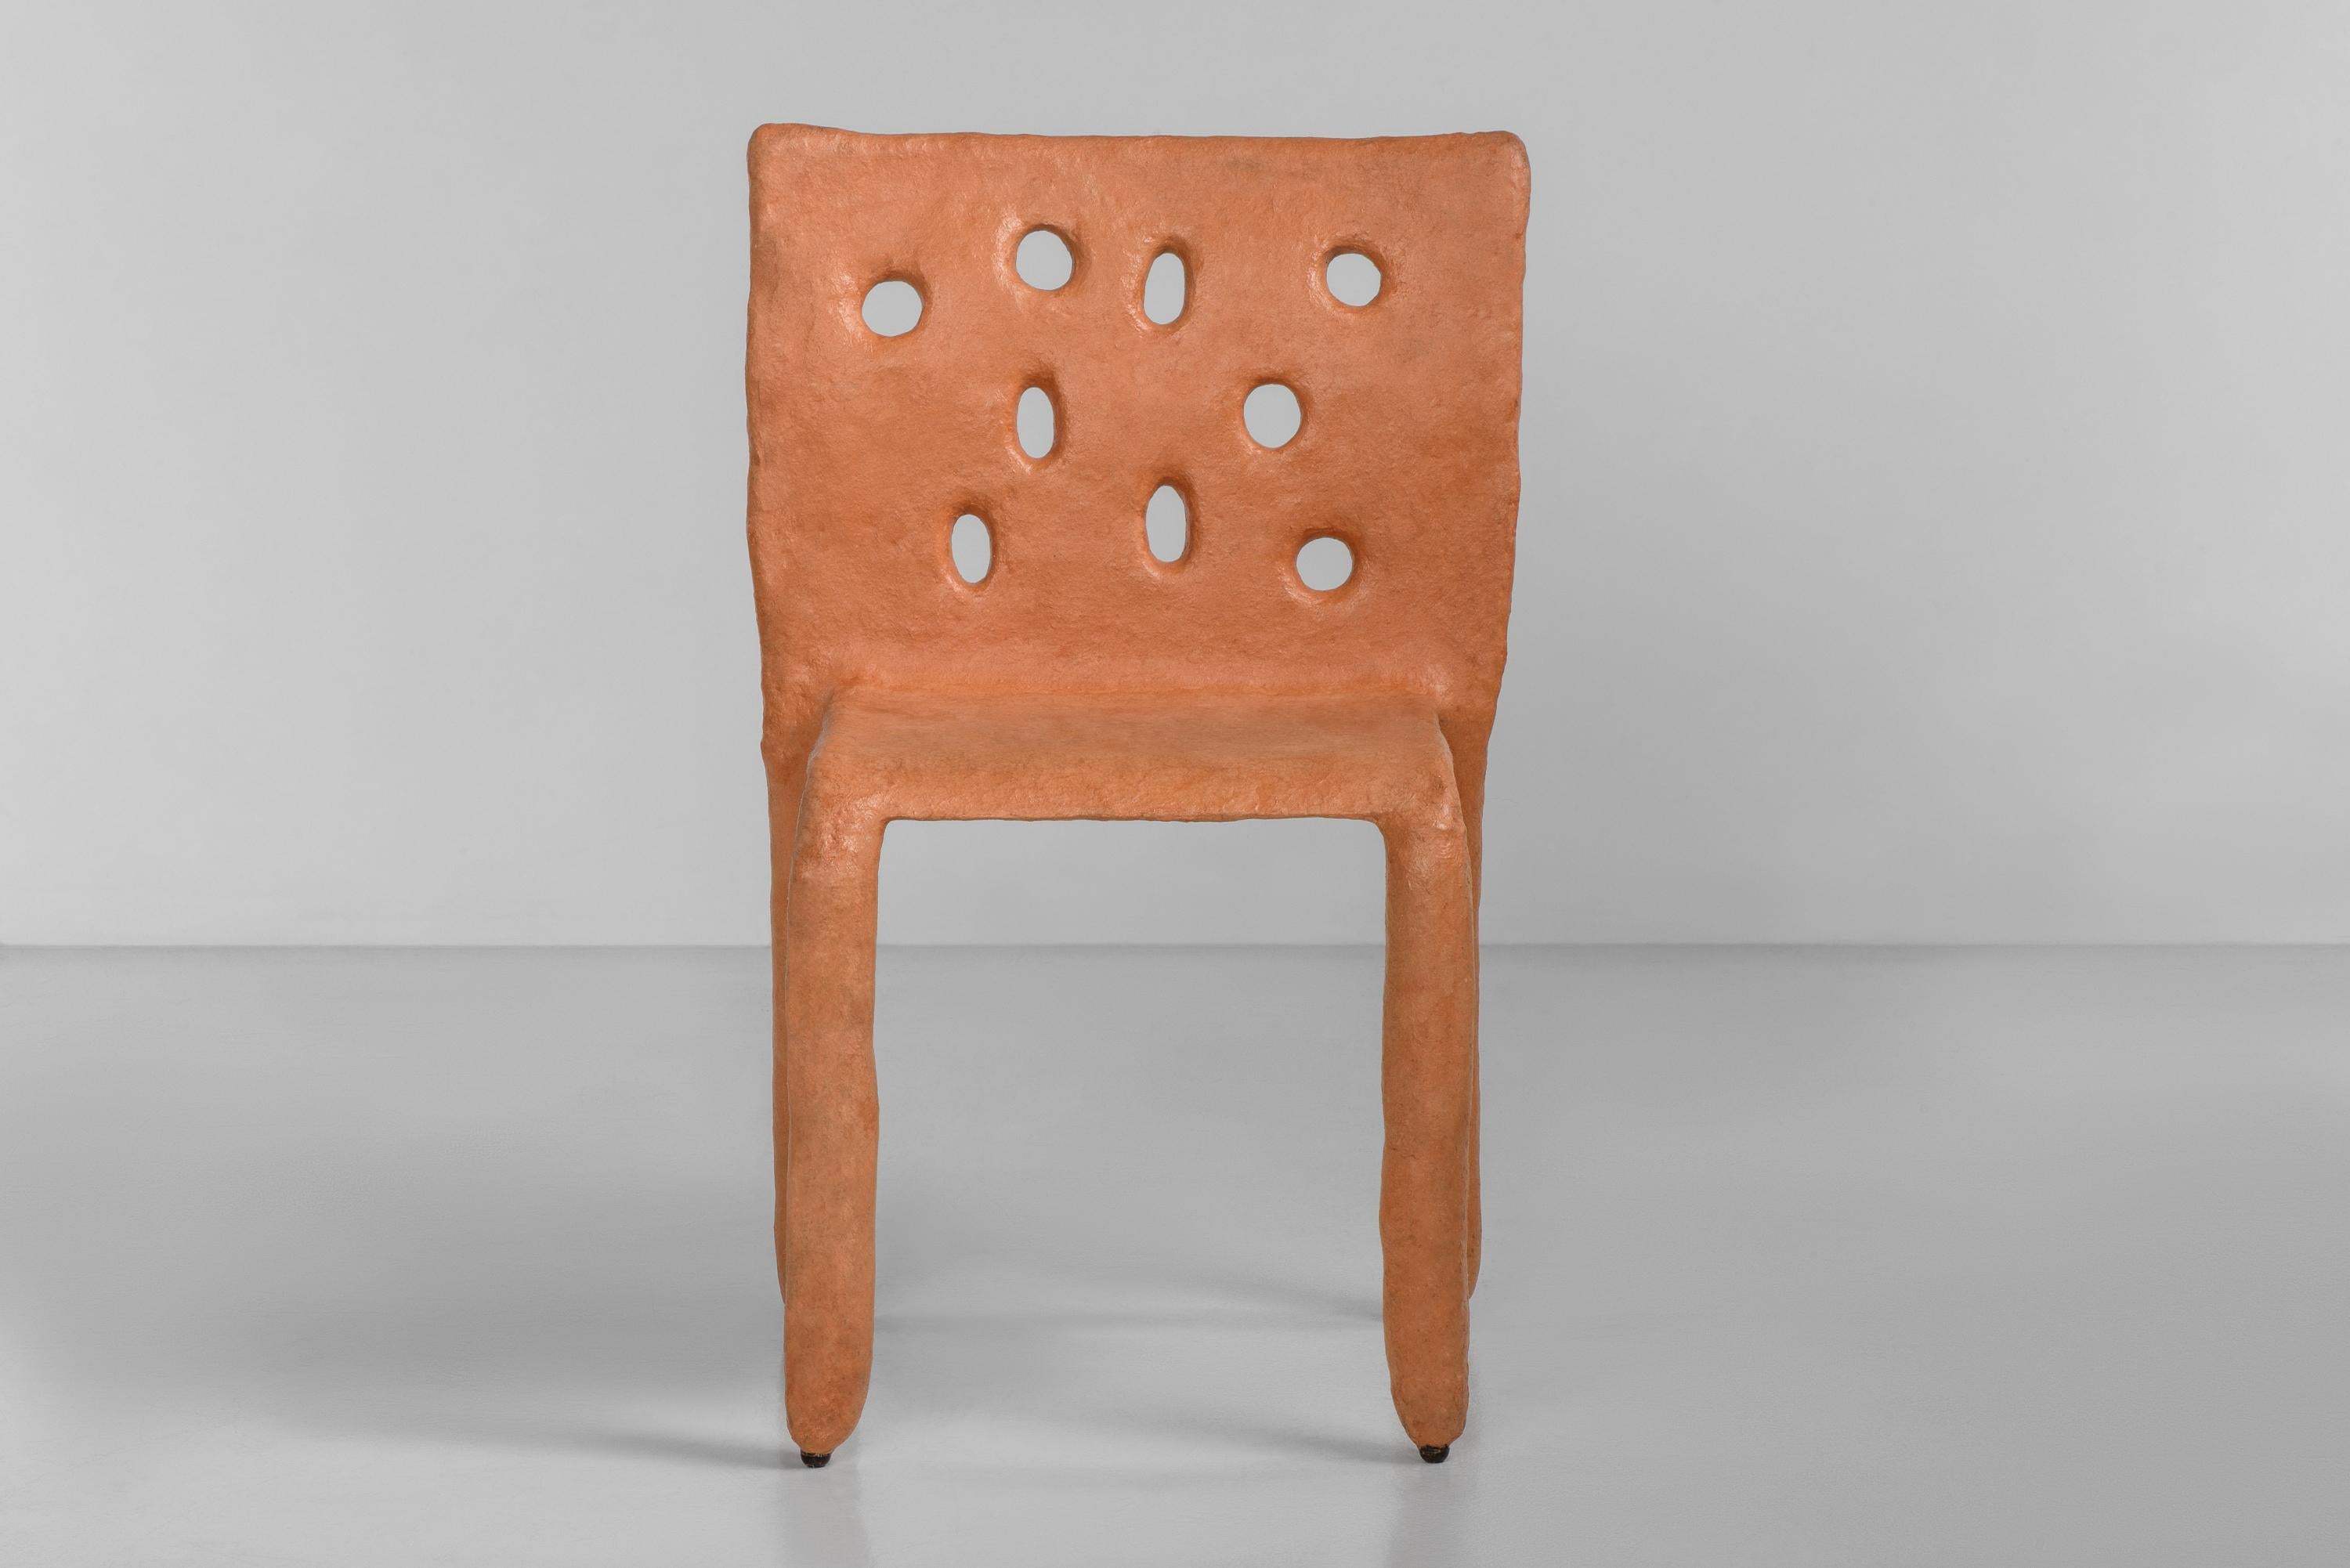 Sculpted Outdoor contemporary chair by Faina.
Design: Victoriya Yakusha.
Material: steel, flax rubber, biopolymer, cellulose.
Dimensions: height 82 x width 54 x legs depth 45 cm.
 Weight: 15 kilos.

Made in the style of ethnic minimalism, the